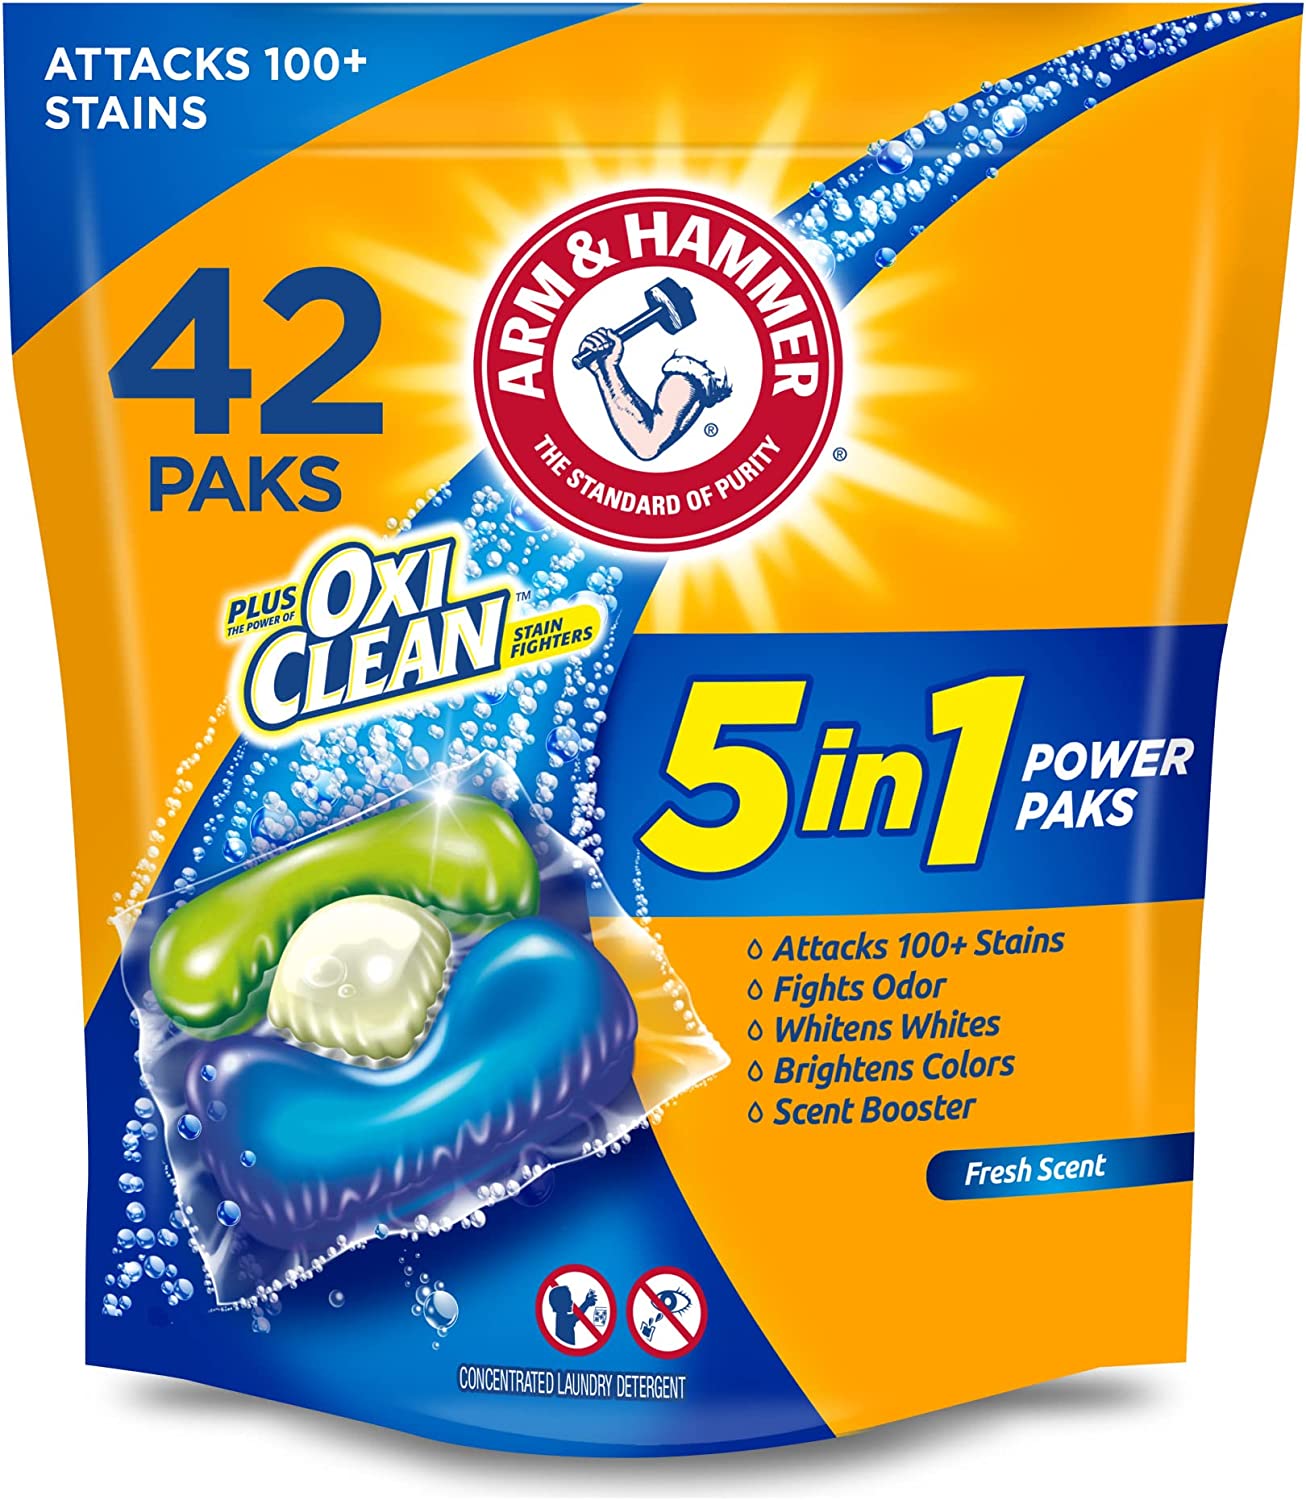 42 ct Arm & Hammer Plus Oxi Clean Concentrated Laundry Detergent, Fresh Scent, 42 Little Power Paks, $5.69 w/ S&S, + more, Amazon